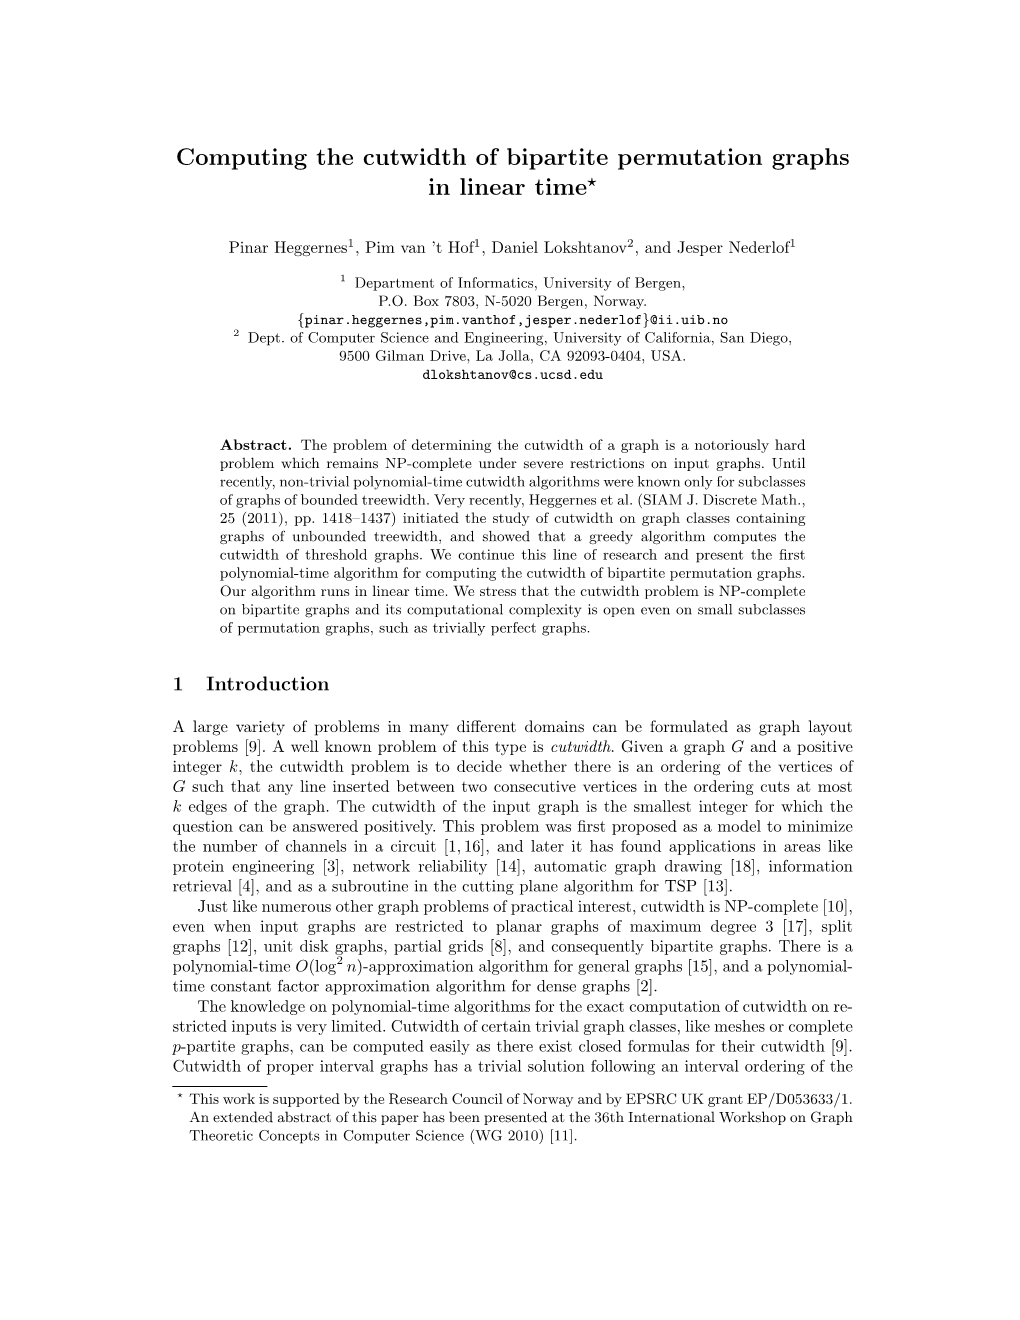 Computing the Cutwidth of Bipartite Permutation Graphs in Linear Time*